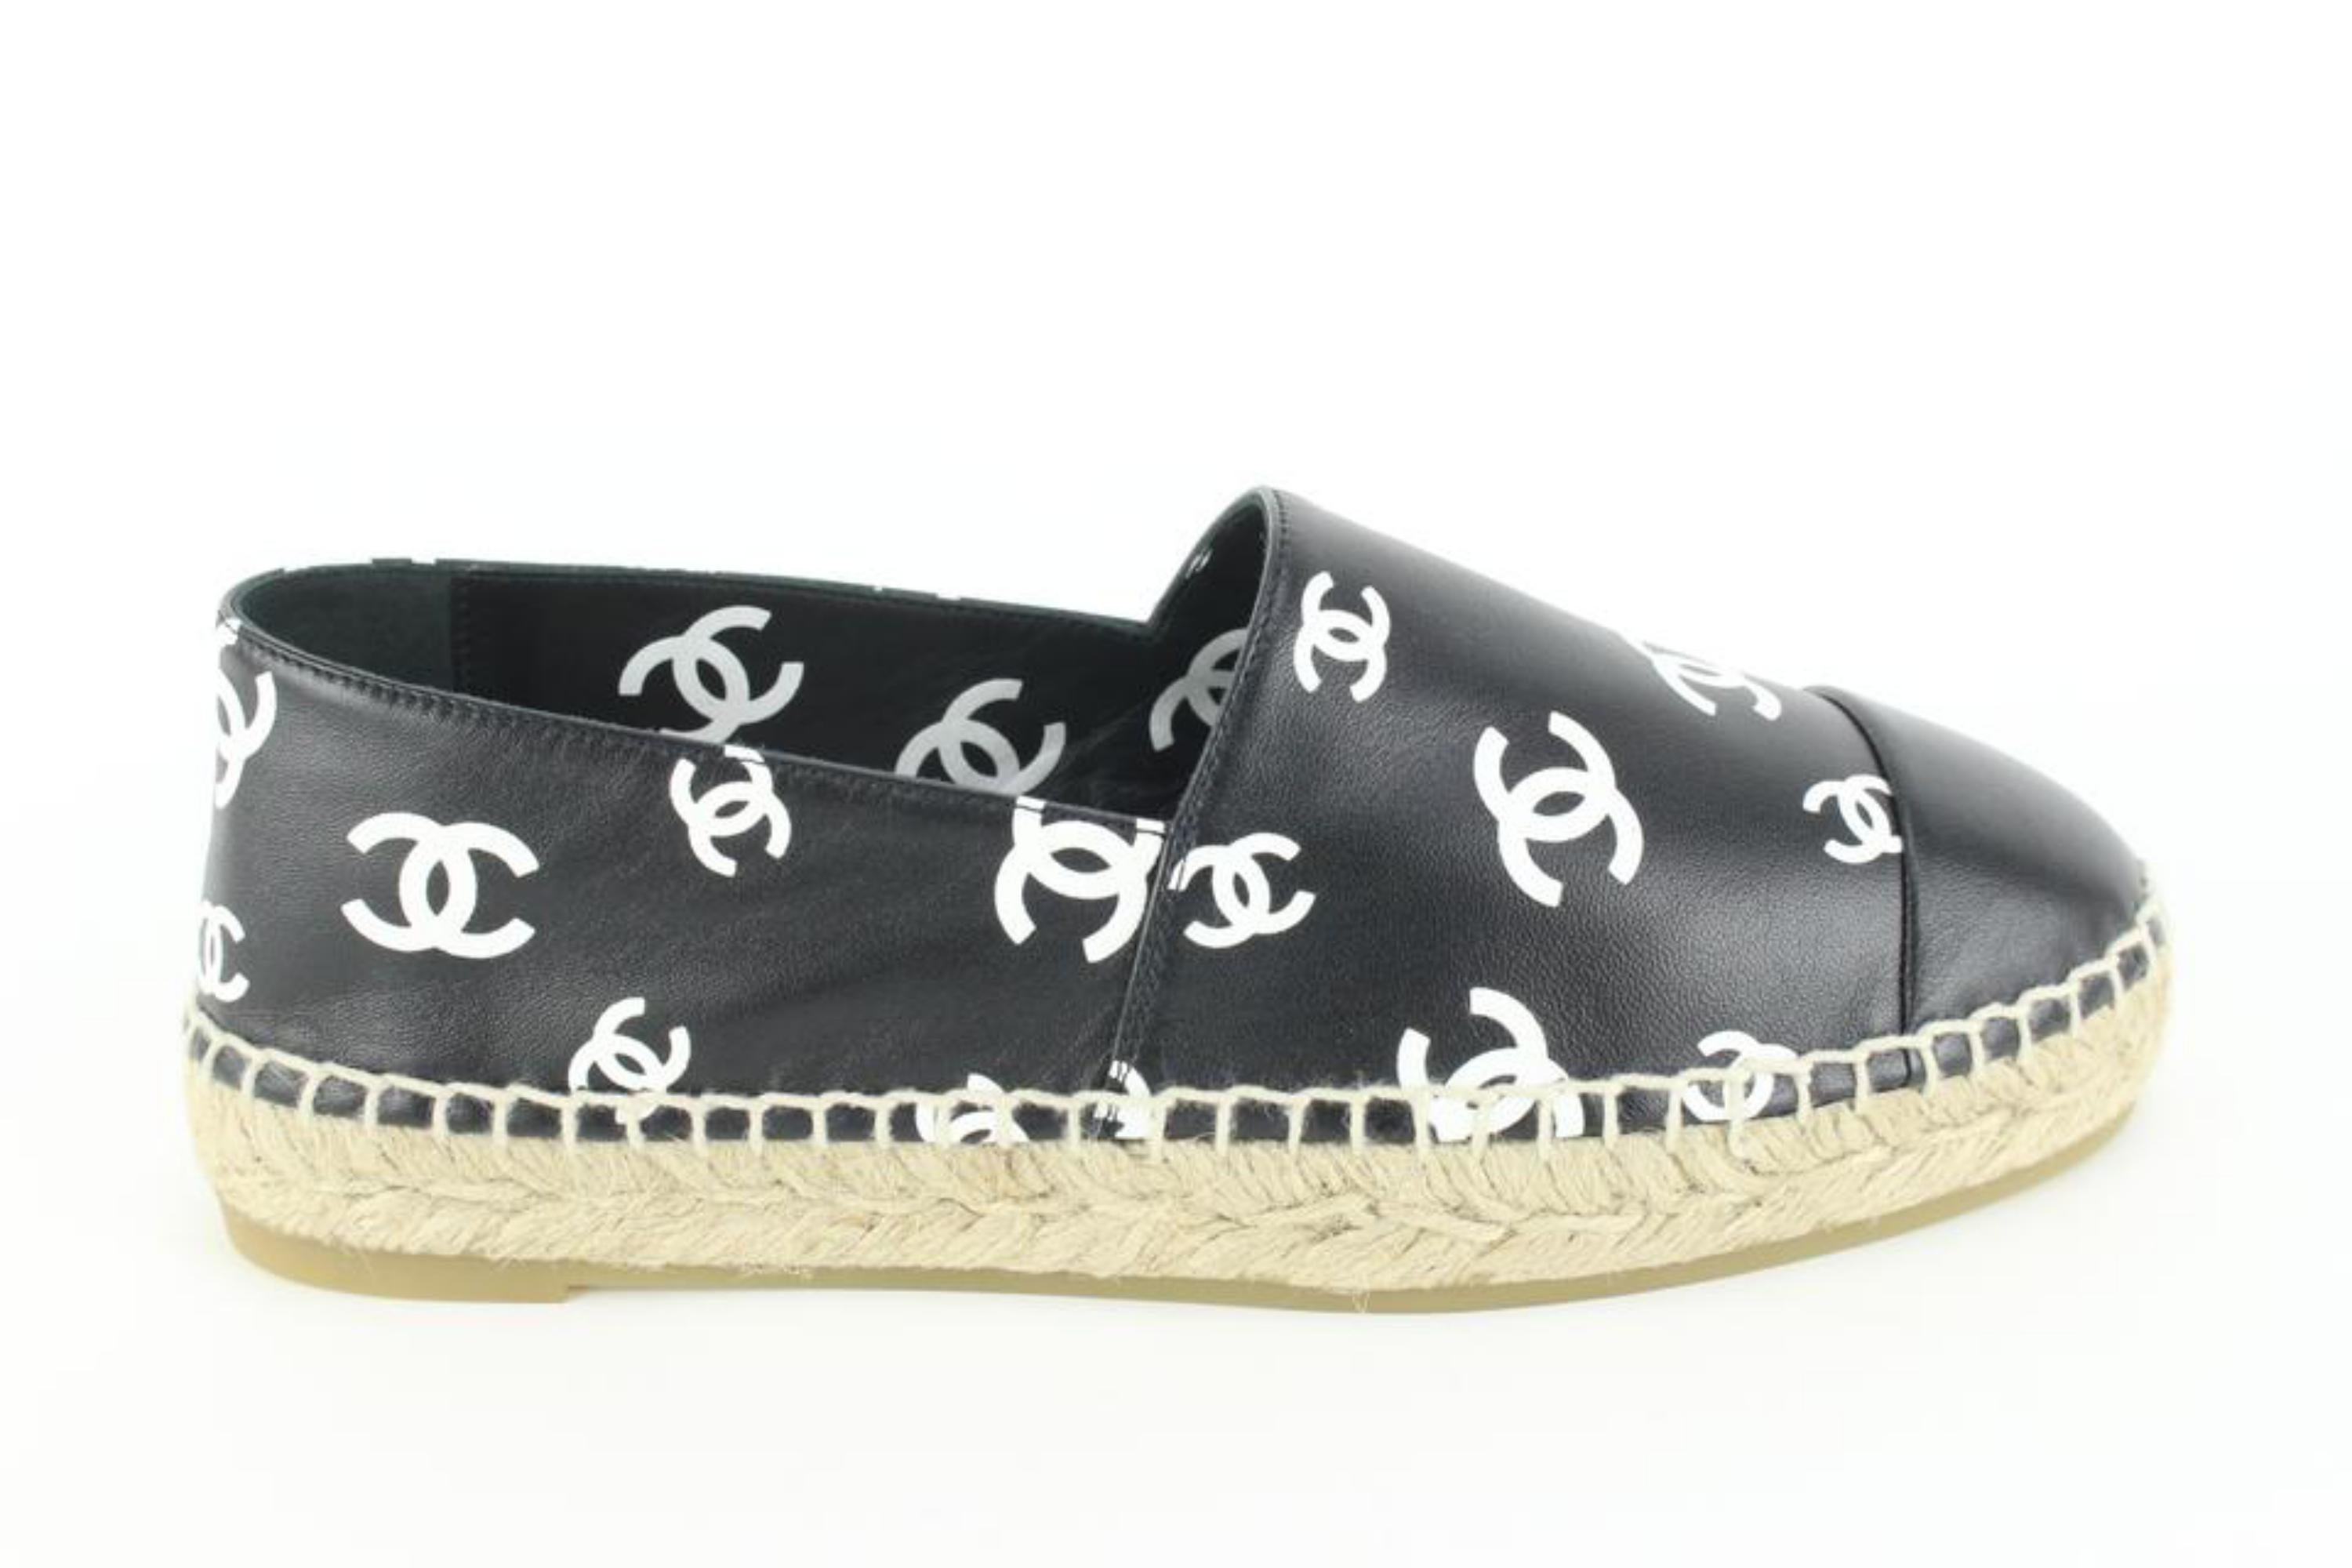 Authentic Second Hand Chanel Logo Leather Espadrilles PSS56100183  THE  FIFTH COLLECTION